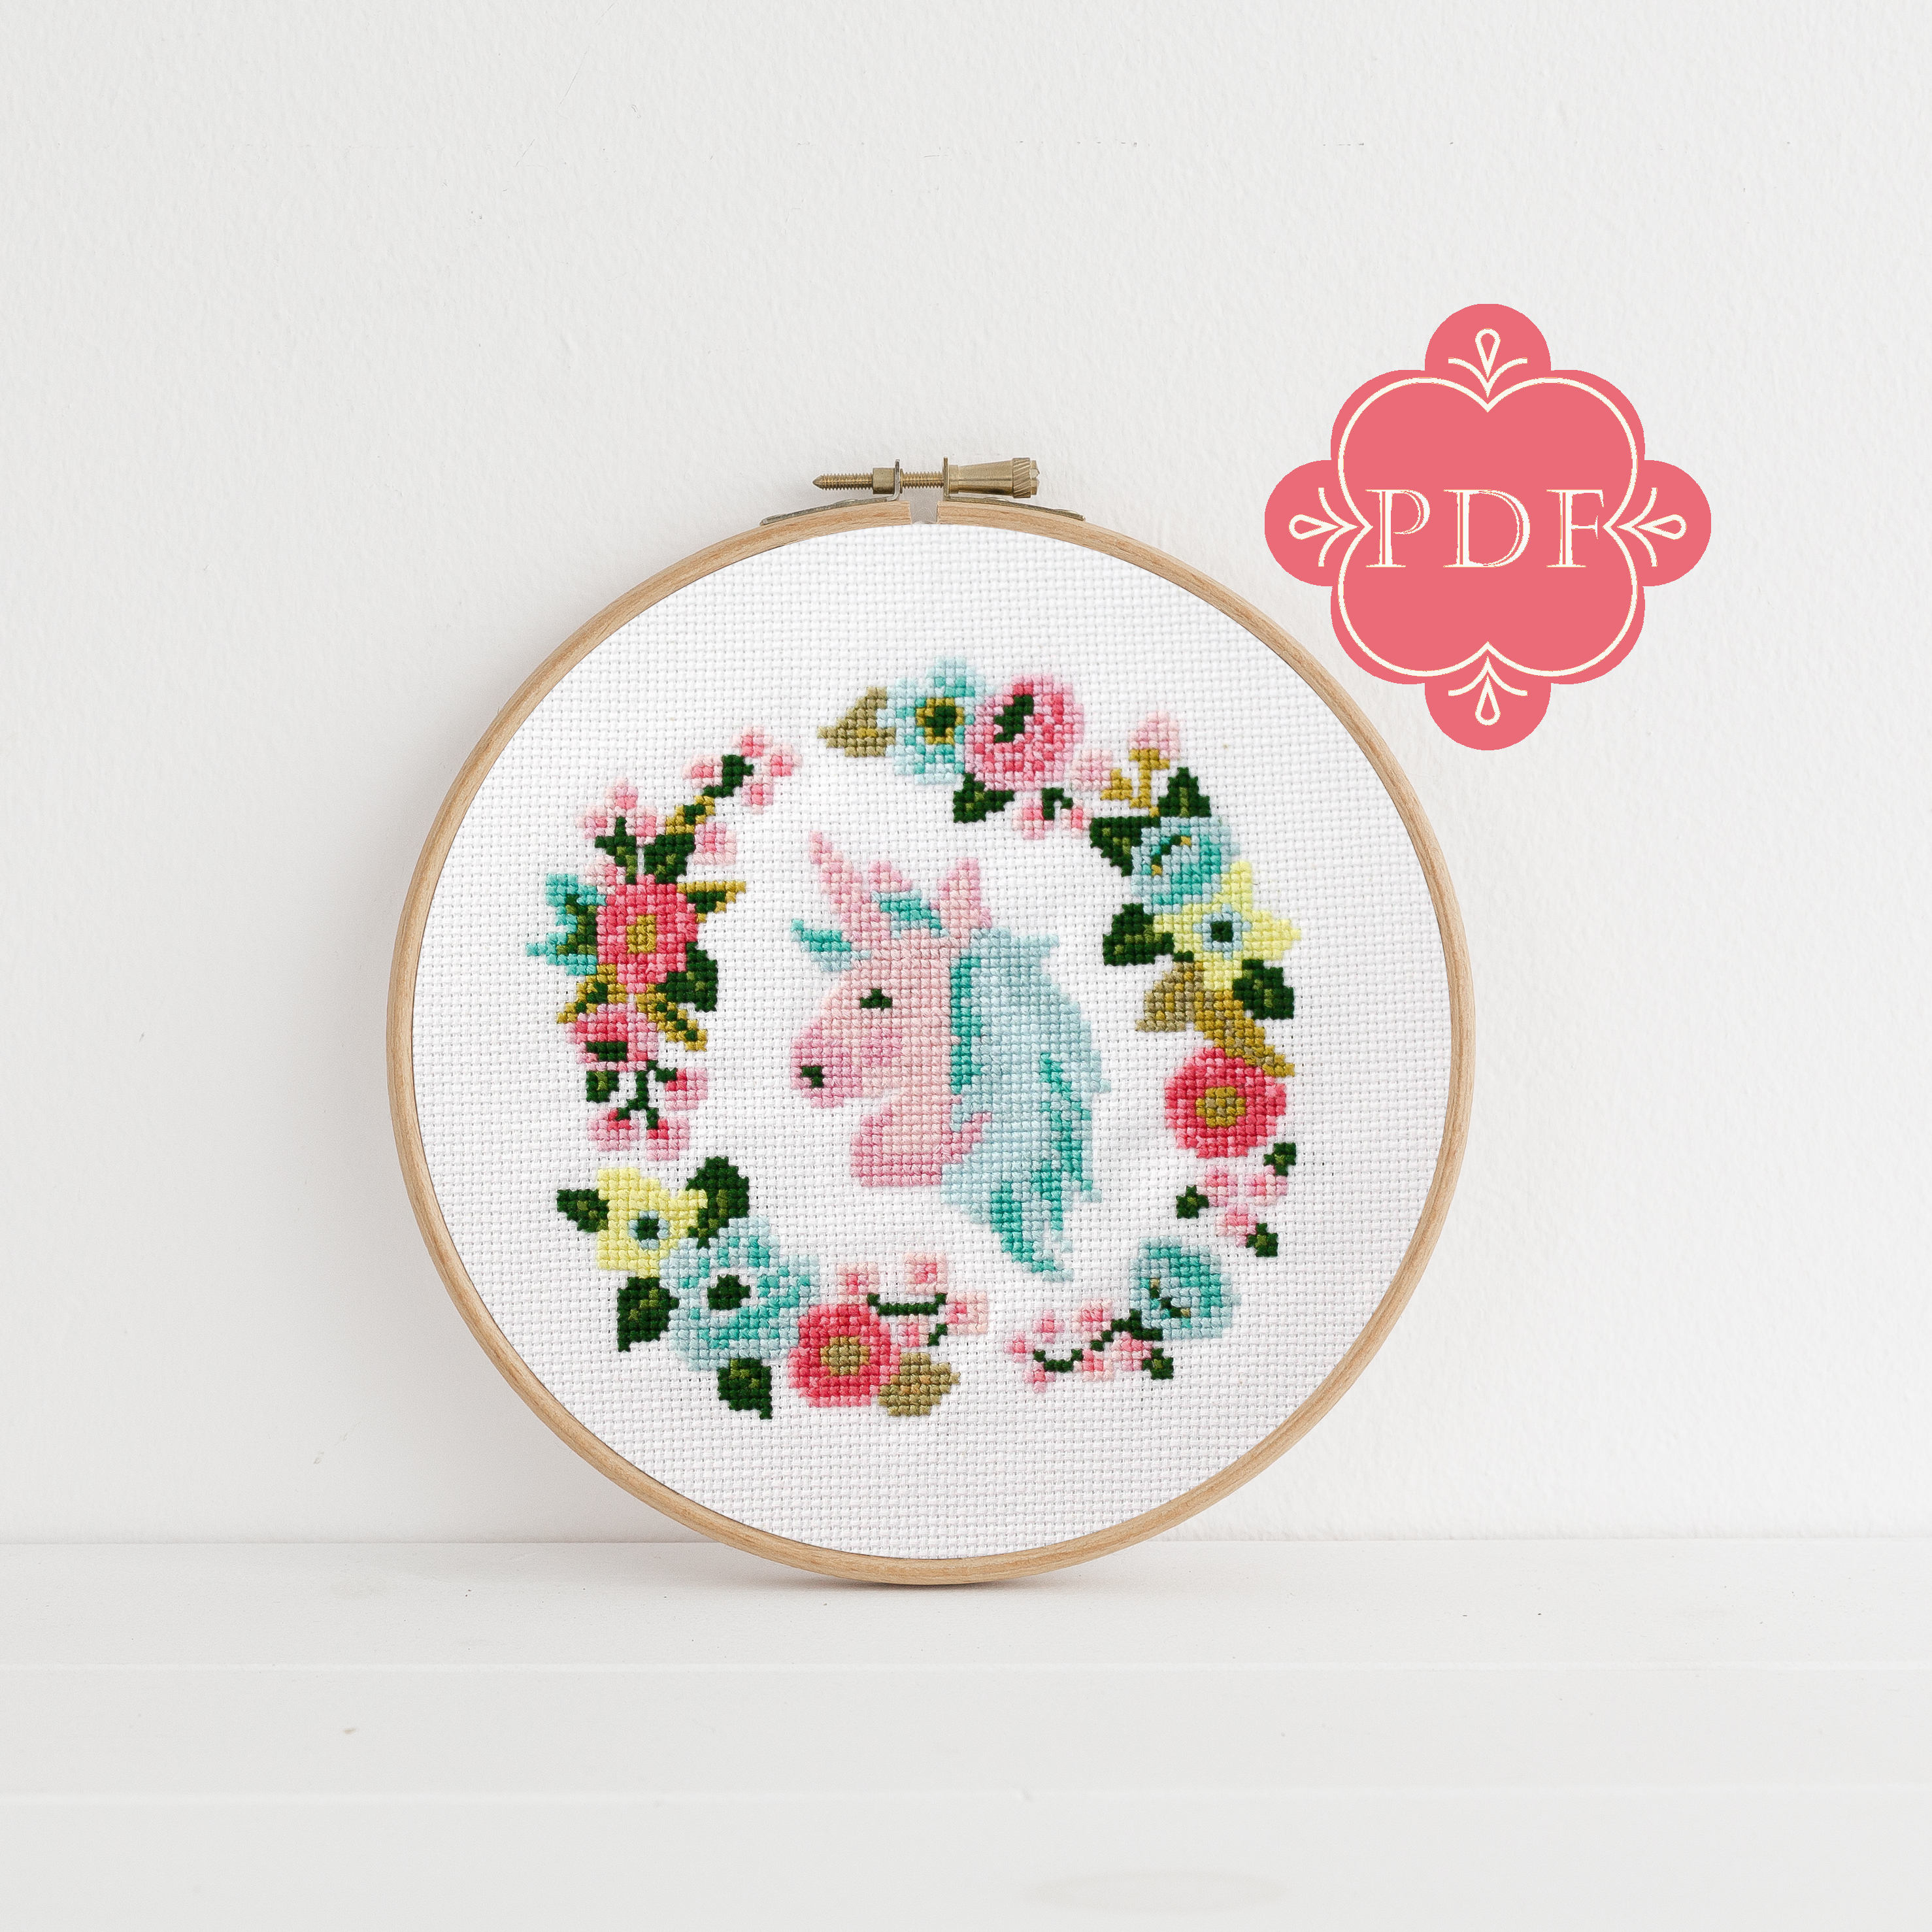 Dmc Embroidery Patterns Pdf Counted Cross Stitch Unicorn Cross Stitch Diy Embroidery